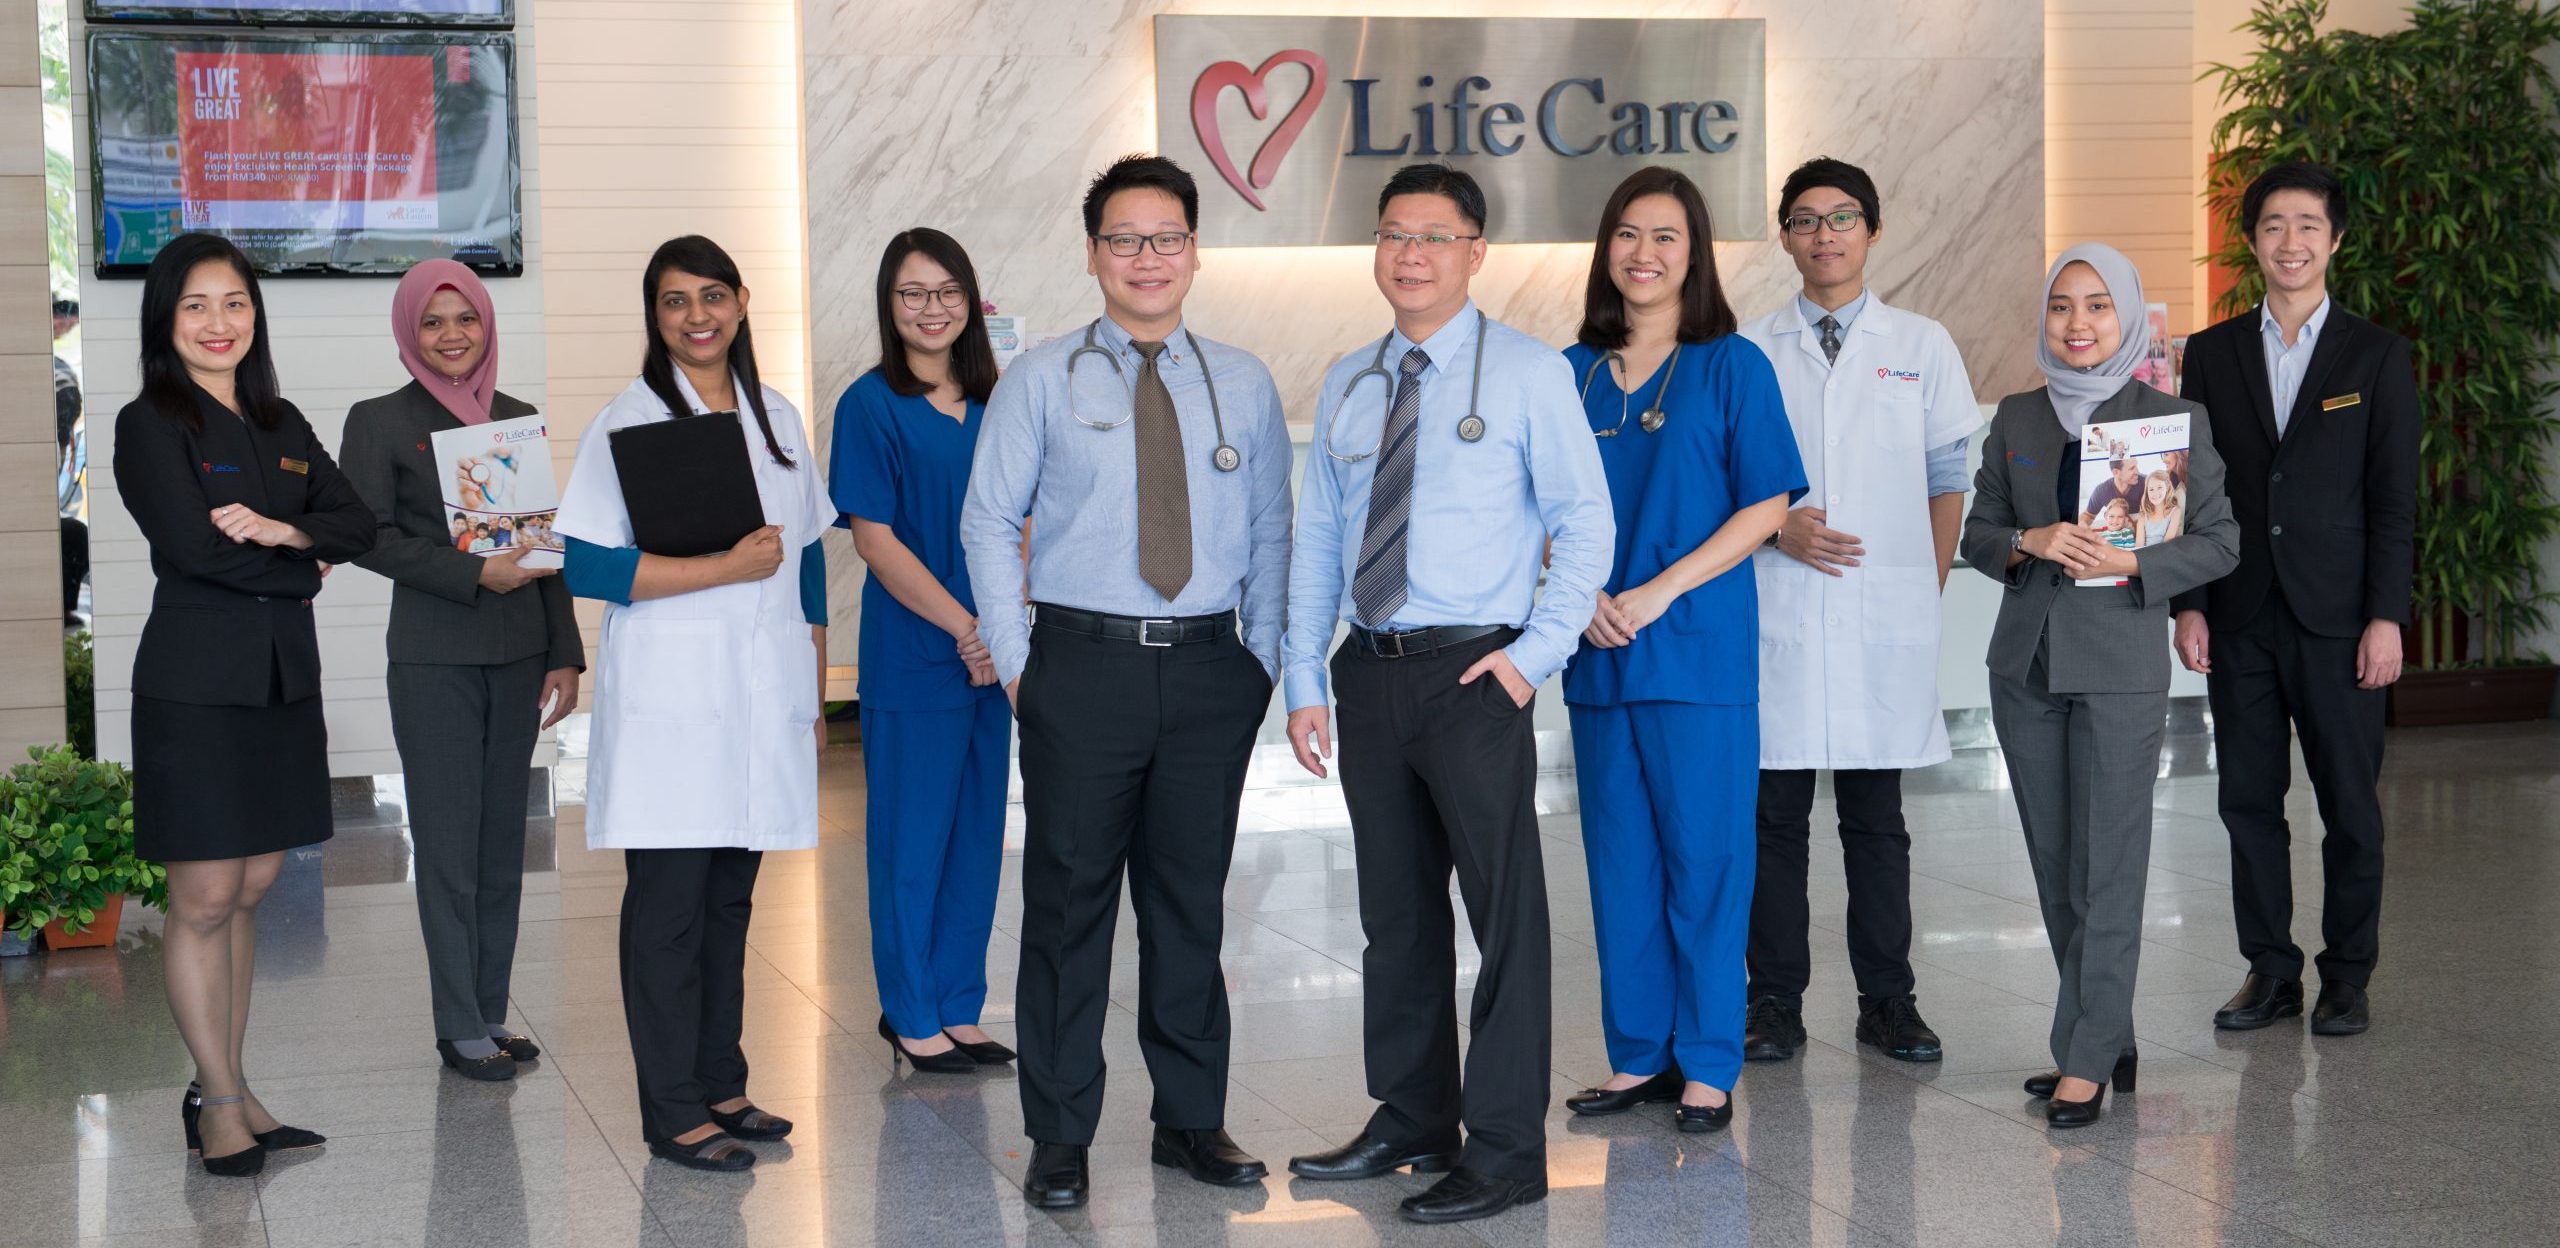 About LifeCare Diagnsotic front staff